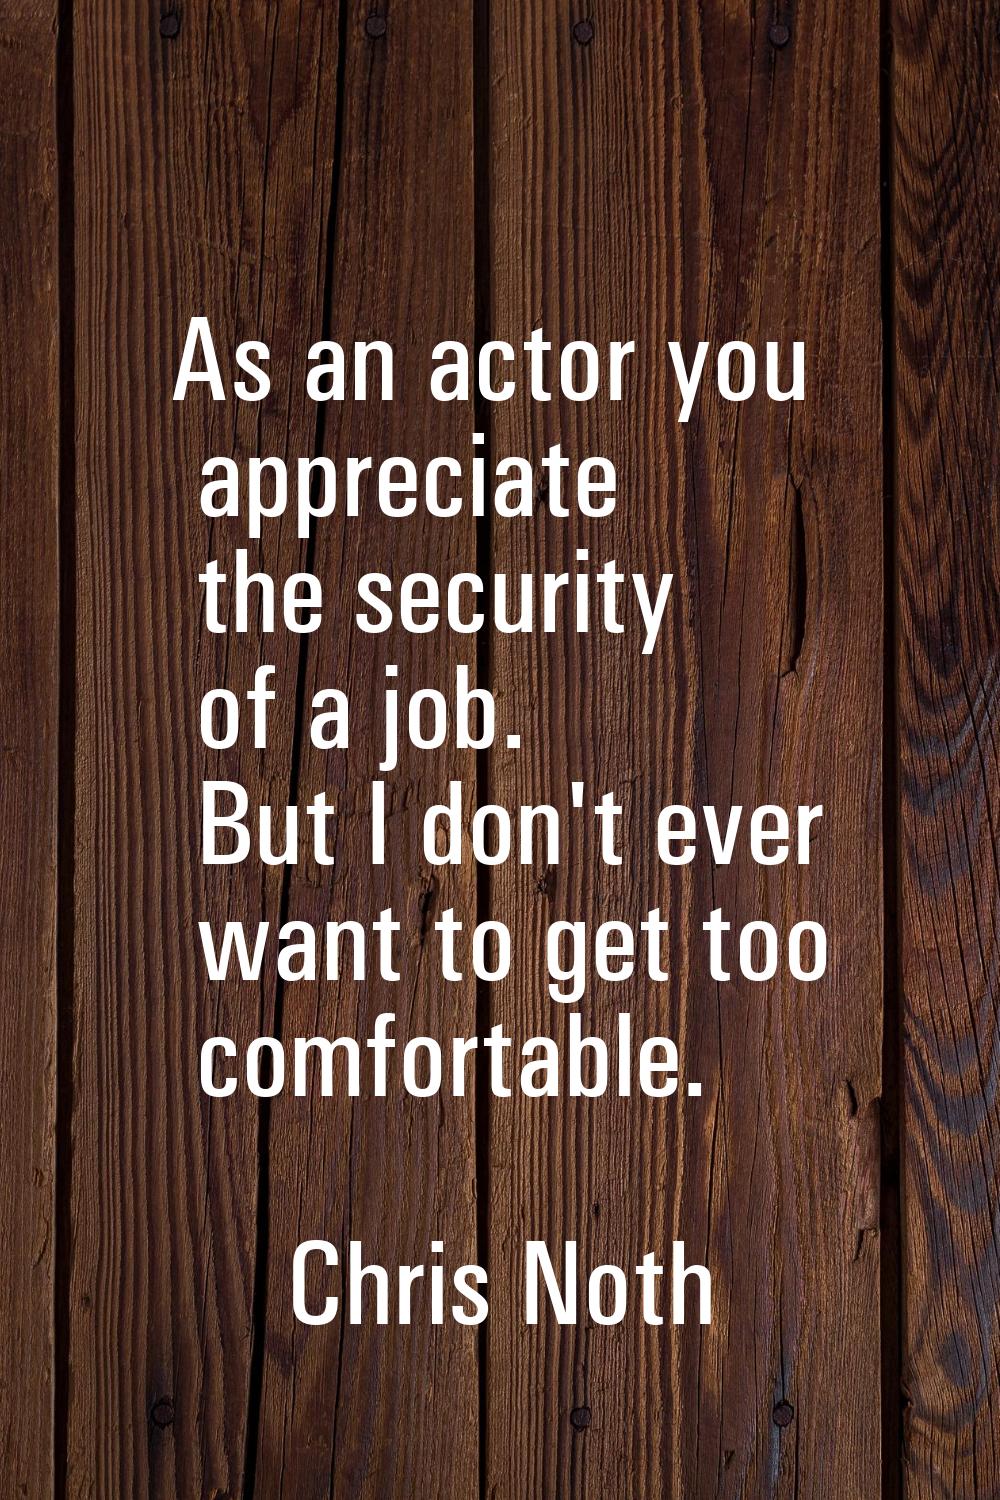 As an actor you appreciate the security of a job. But I don't ever want to get too comfortable.